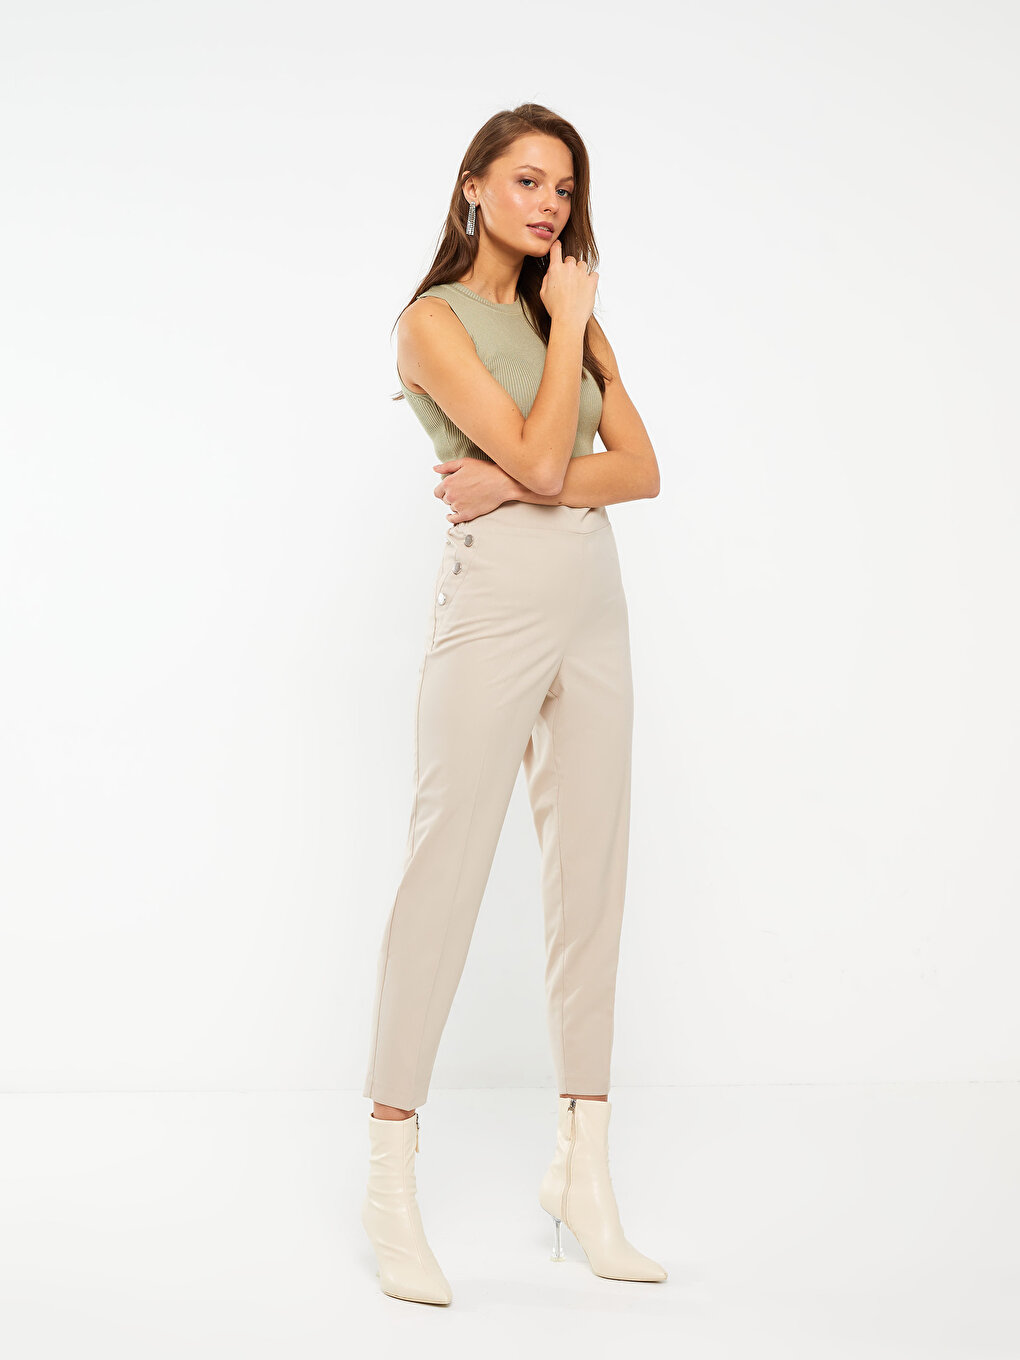 Beige Carrot Fit Pants with Drawstring Online Shopping  OXXOSHOP